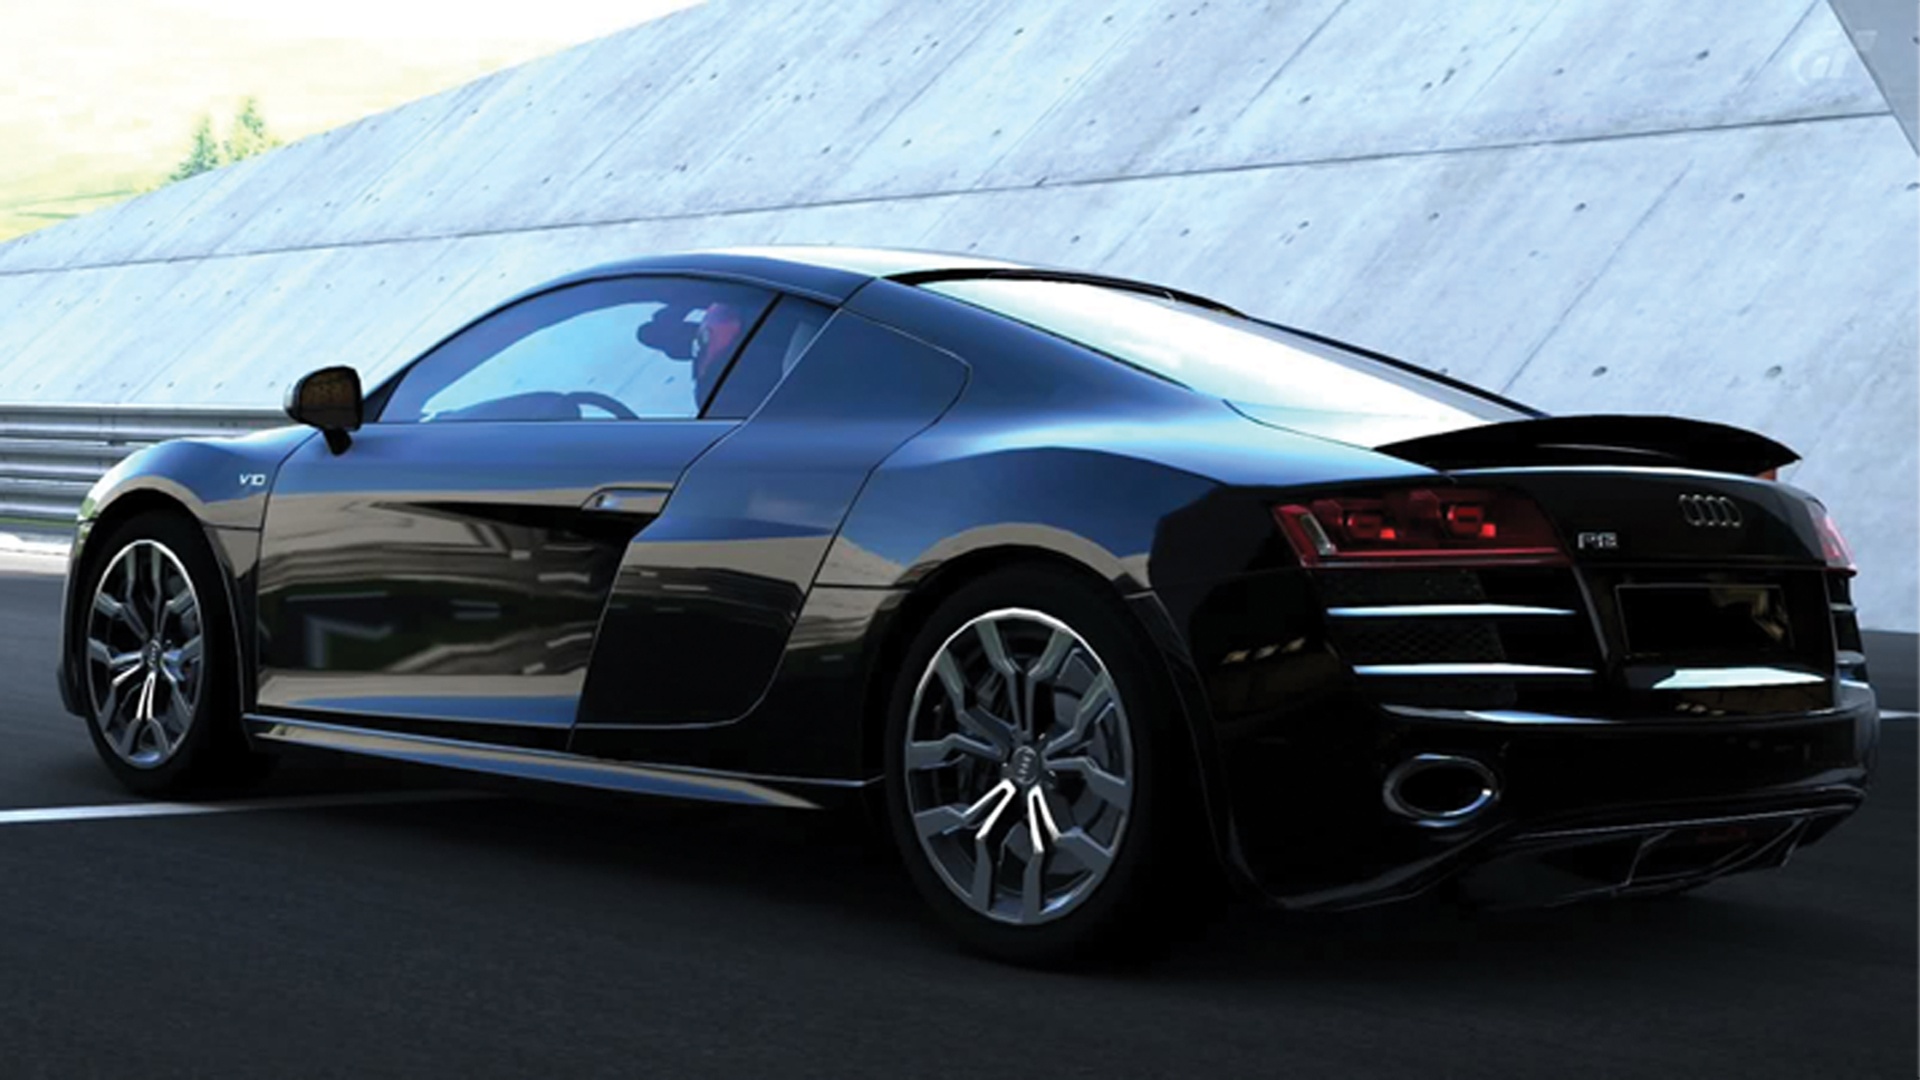 The Audi R8 Wallpapers   1920x1080   362912